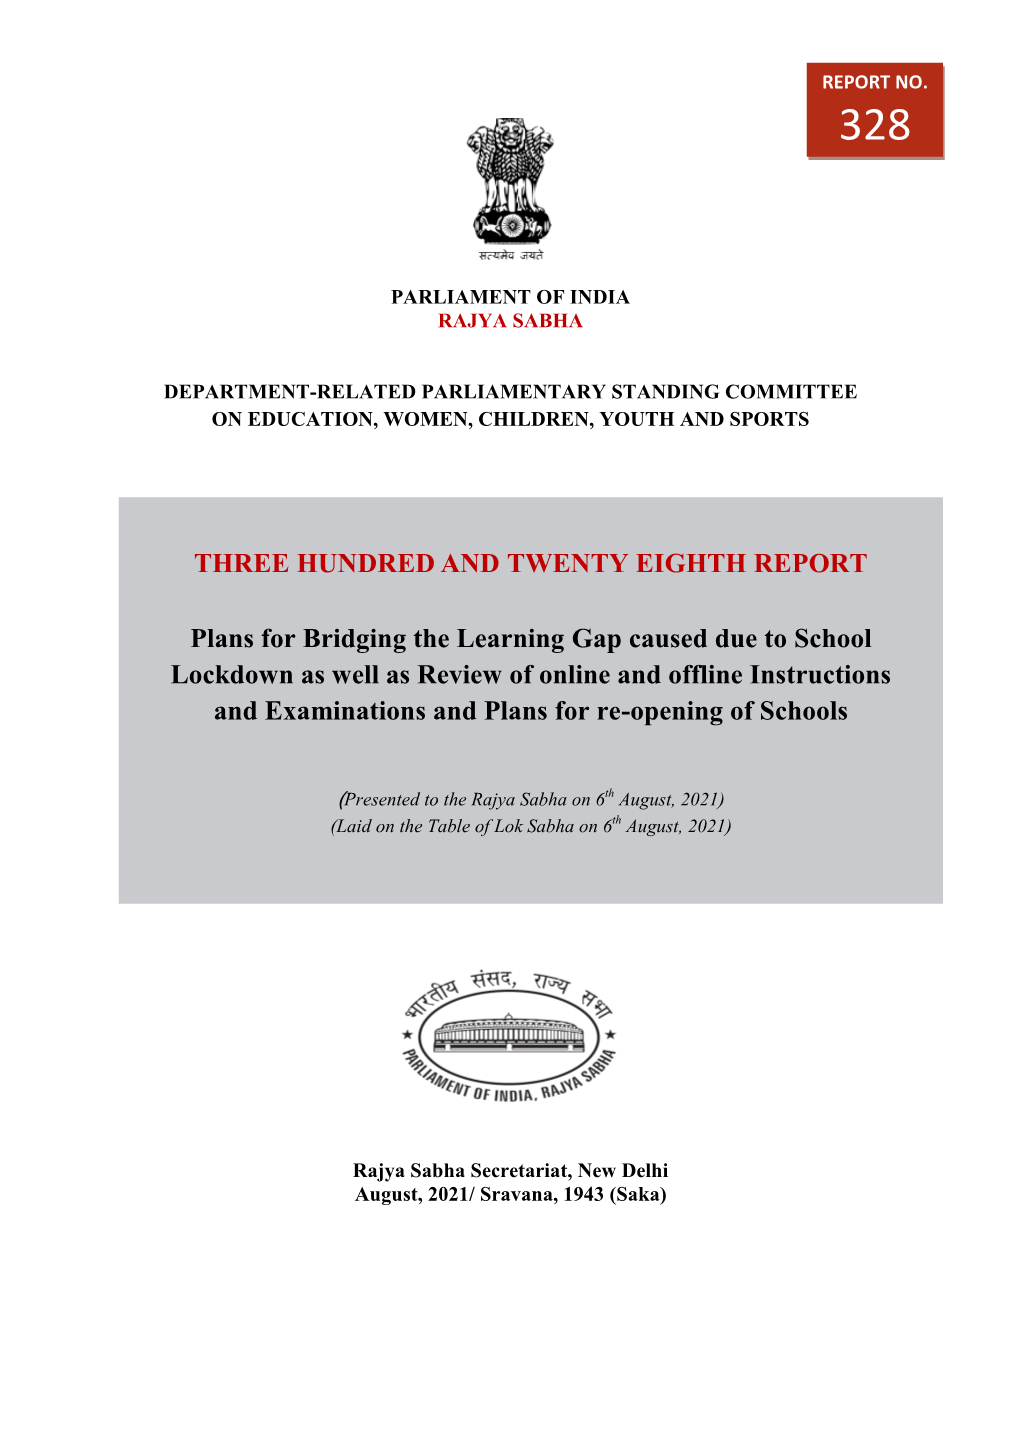 THREE HUNDRED and TWENTY EIGHTH REPORT Plans For